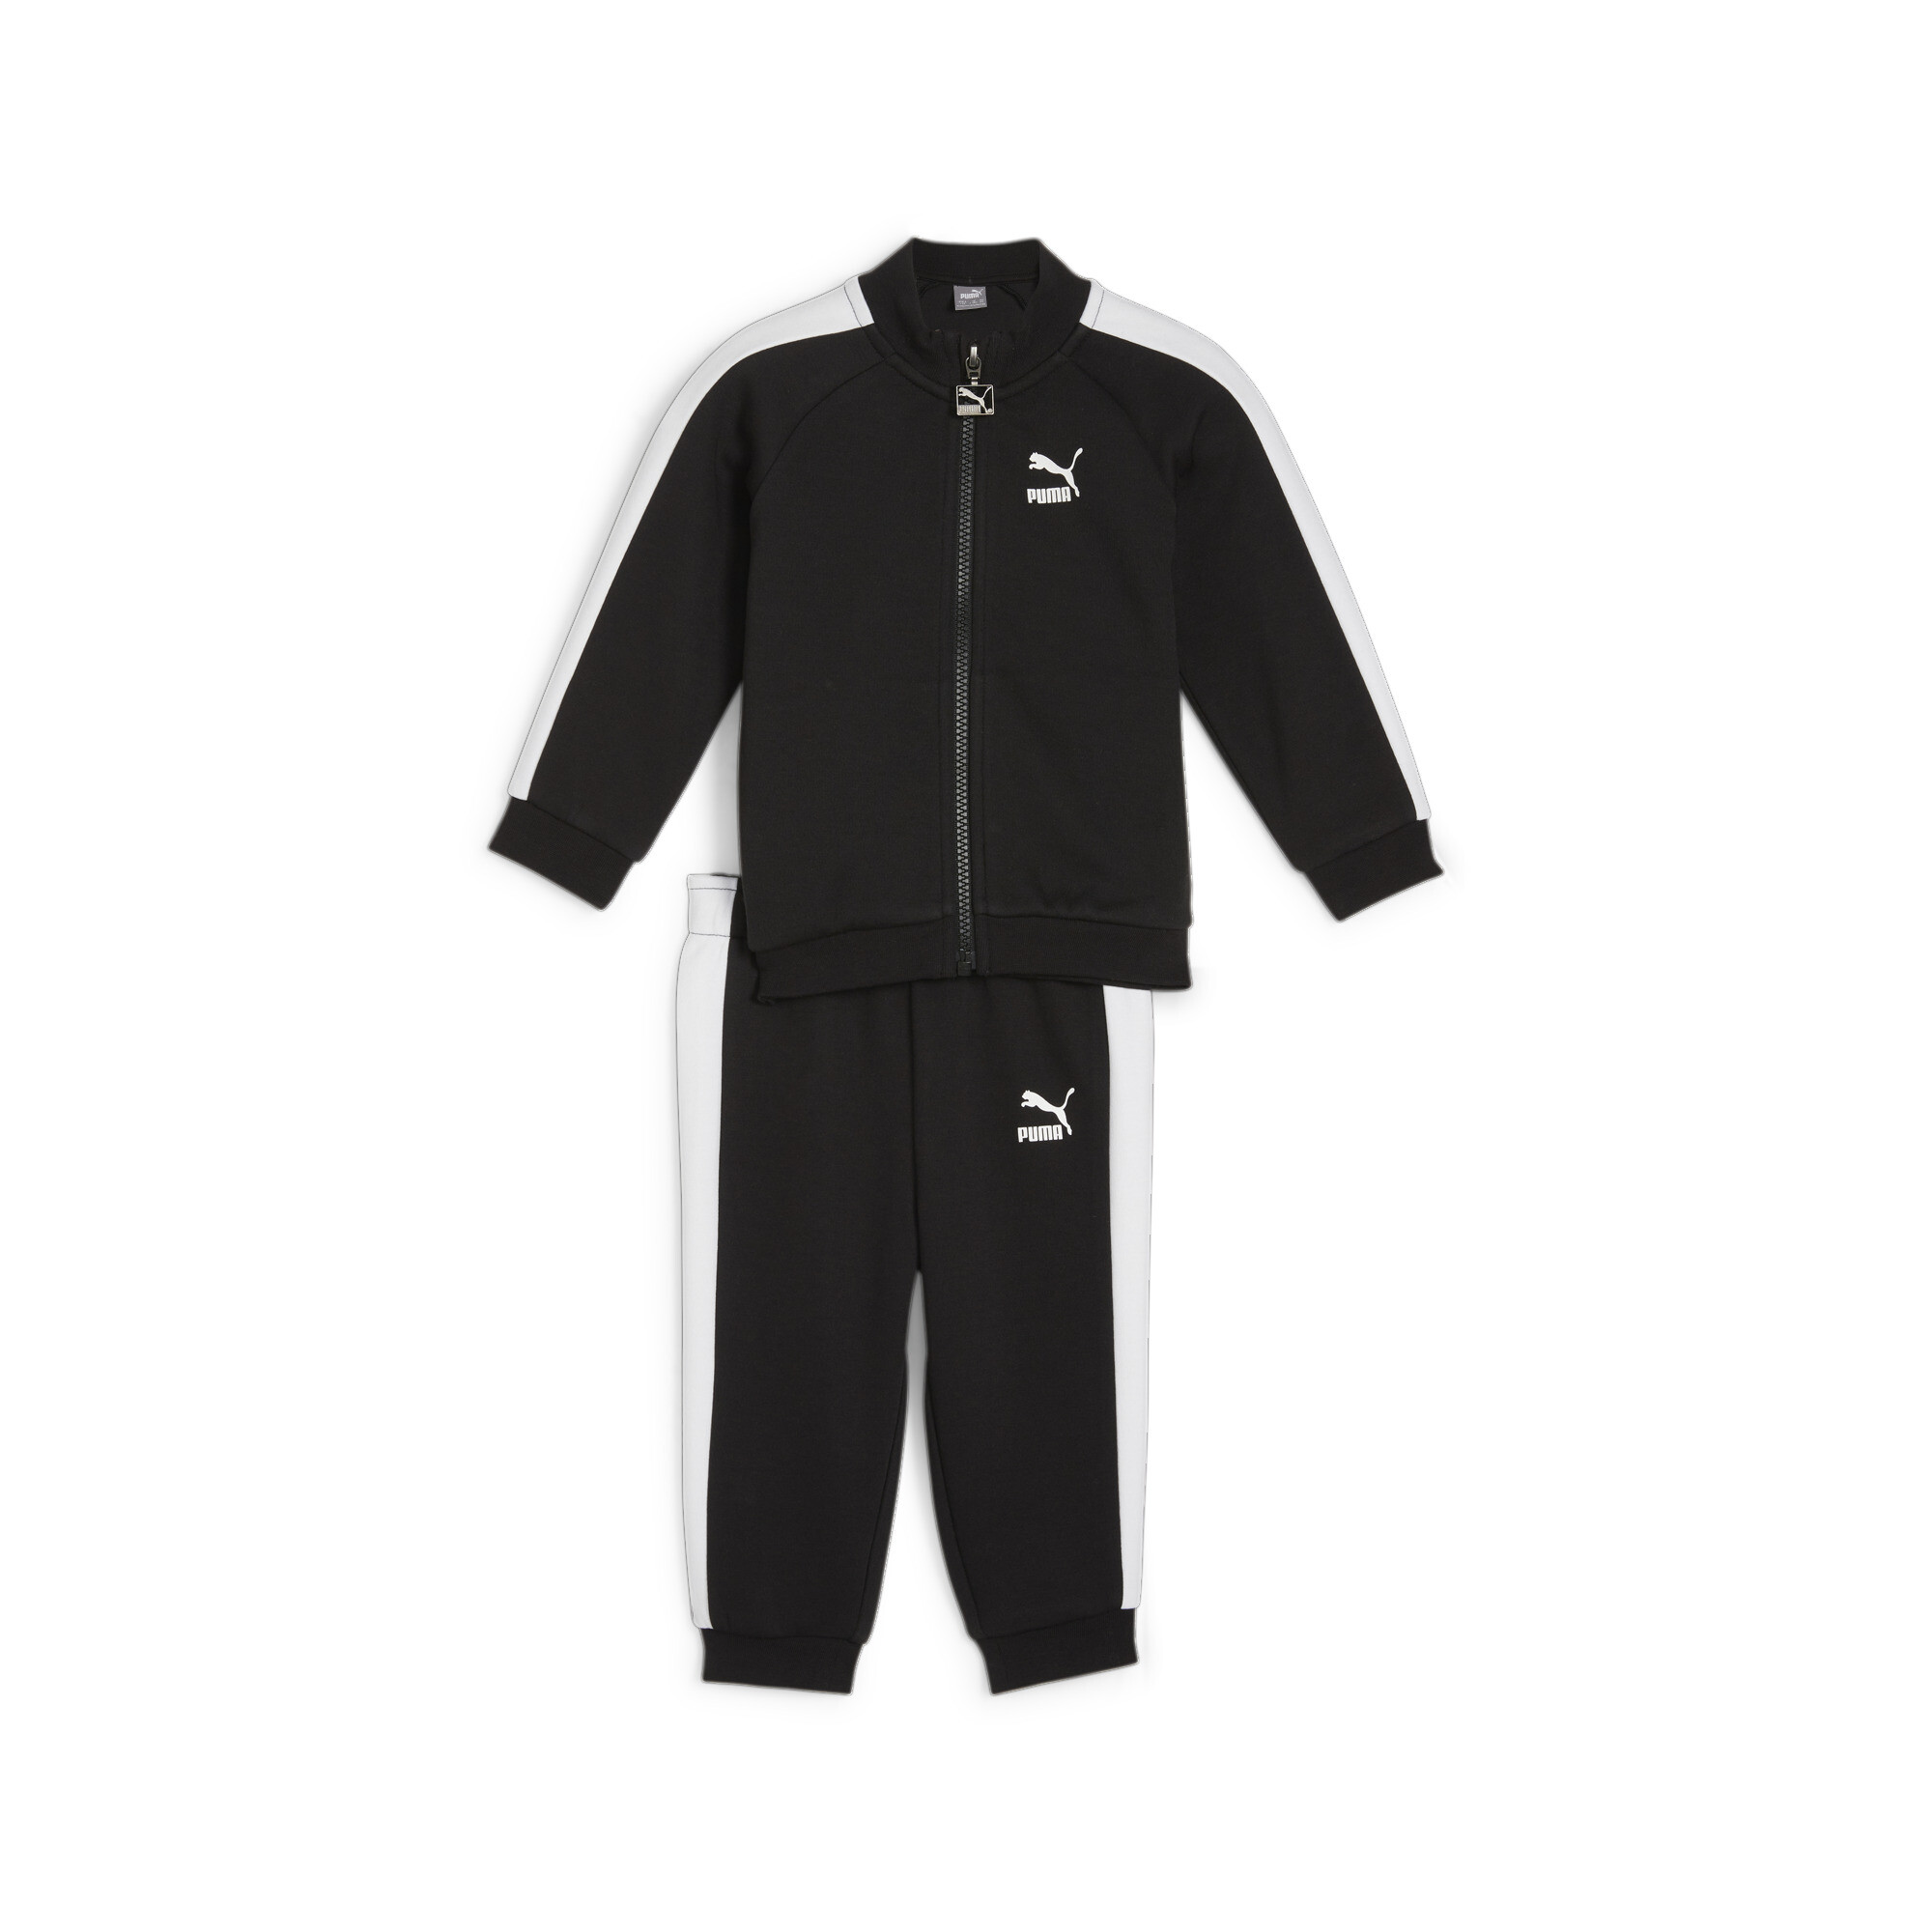 PUMA MINICATS T7 ICONIC Baby Tracksuit Set In 10 - Black, Size 3-4 Youth